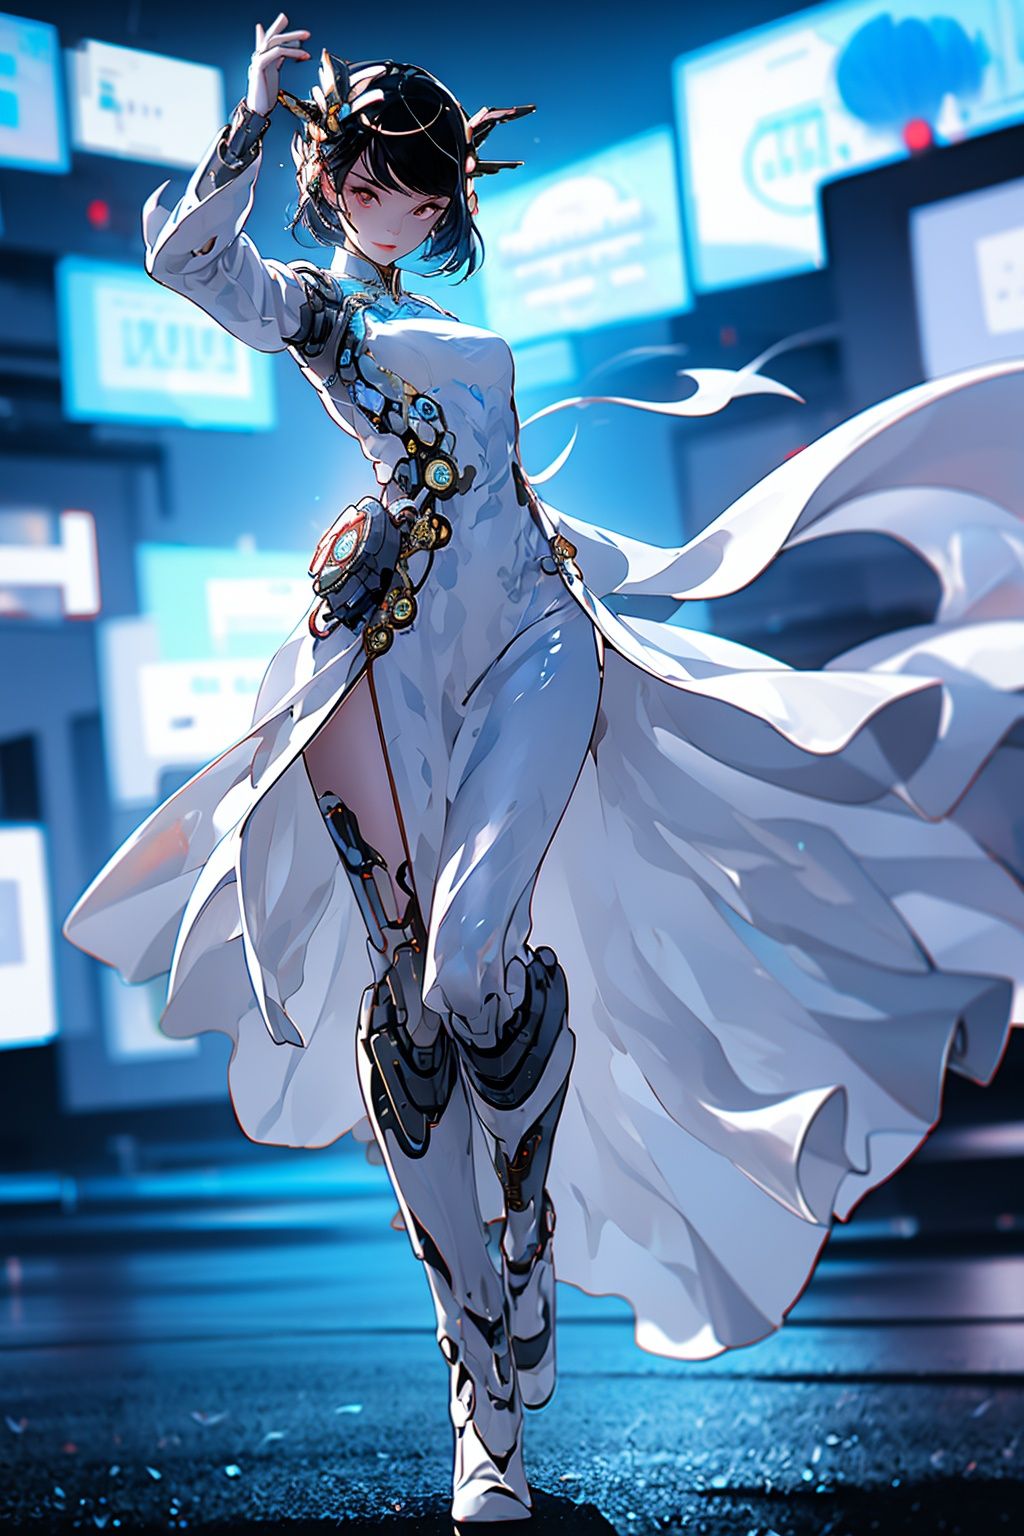 1 girl, full body,  long sleeves, chinese_clothes, in white and blue,cyberhanfu, cyberpunk city, dynamic pose, Headdress, hair ornament, long hair, cyberpunk, a high-tech city, full of machinery and futuristic element, futurism, technology <lora:cyberhanfu_20230617014620-000010:0.8> 